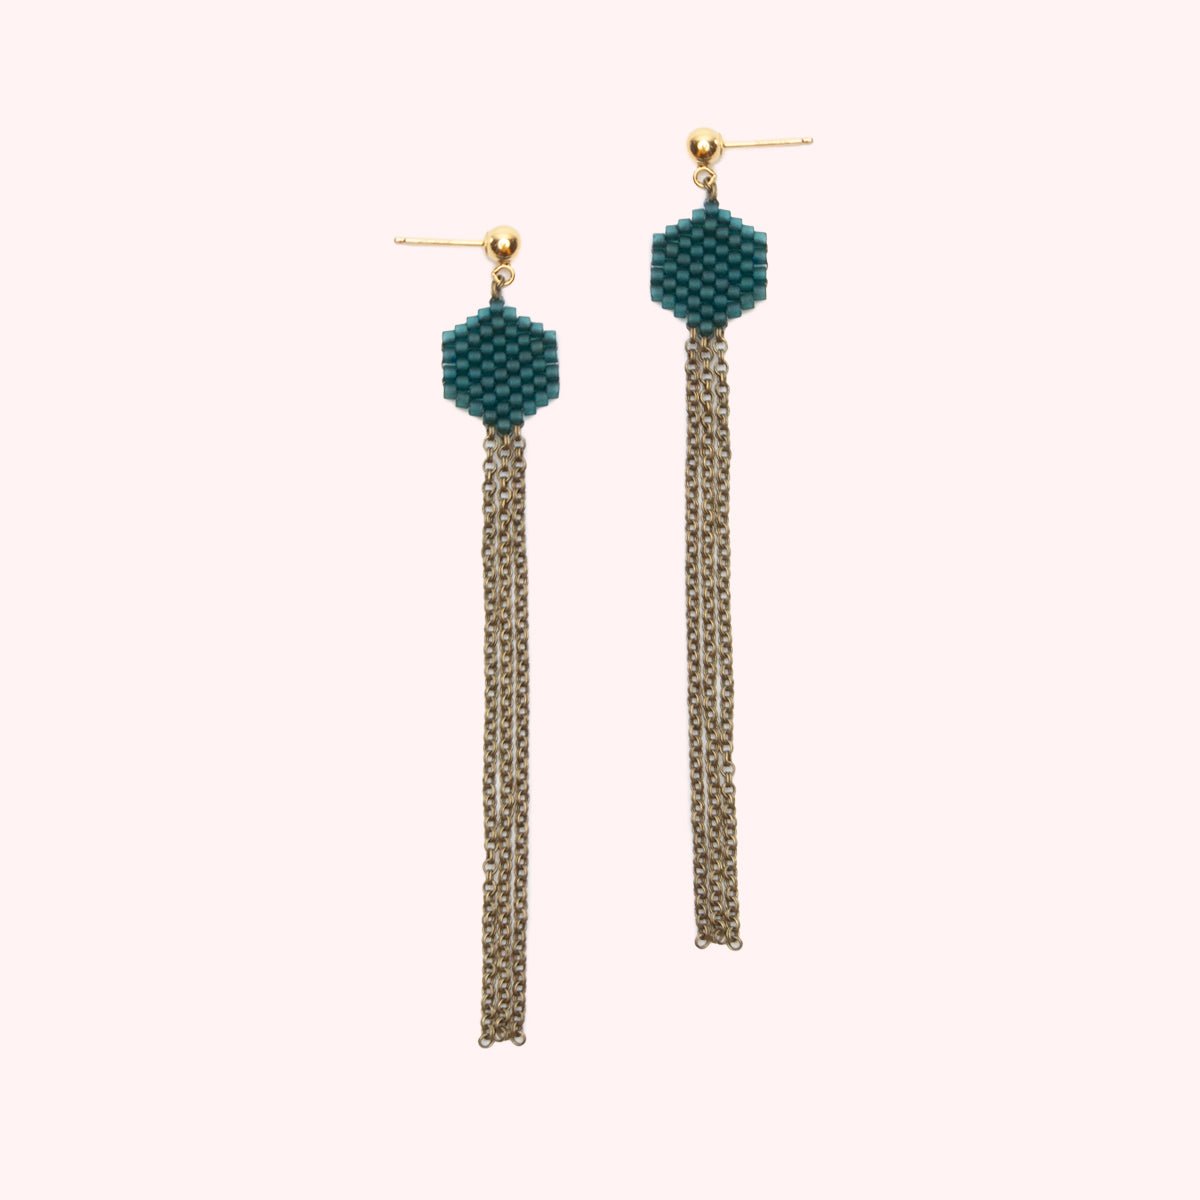 A gold-fill stud earring holds a small beaded hexagon in a jewel tone teal color. A narrow collection of antiqued brass chain hangs from the beaded portion. The Dot Earrings in Teal are designed and handcrafted by A Nod to Design in Portland, OR.